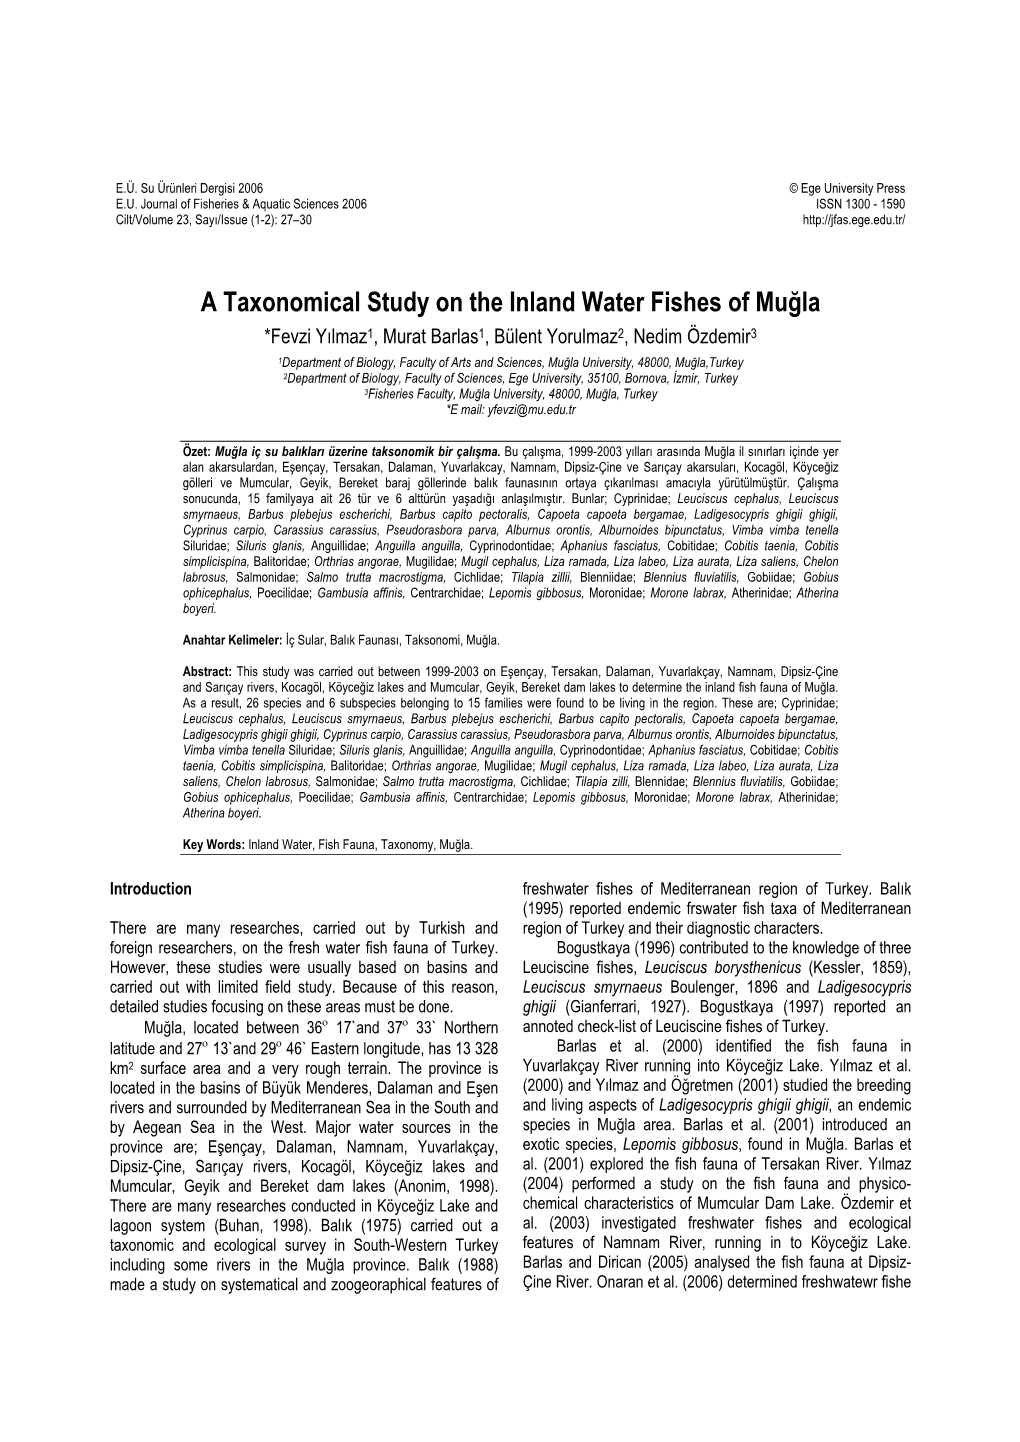 A Taxonomical Study on the Inland Water Fishes of Muğla